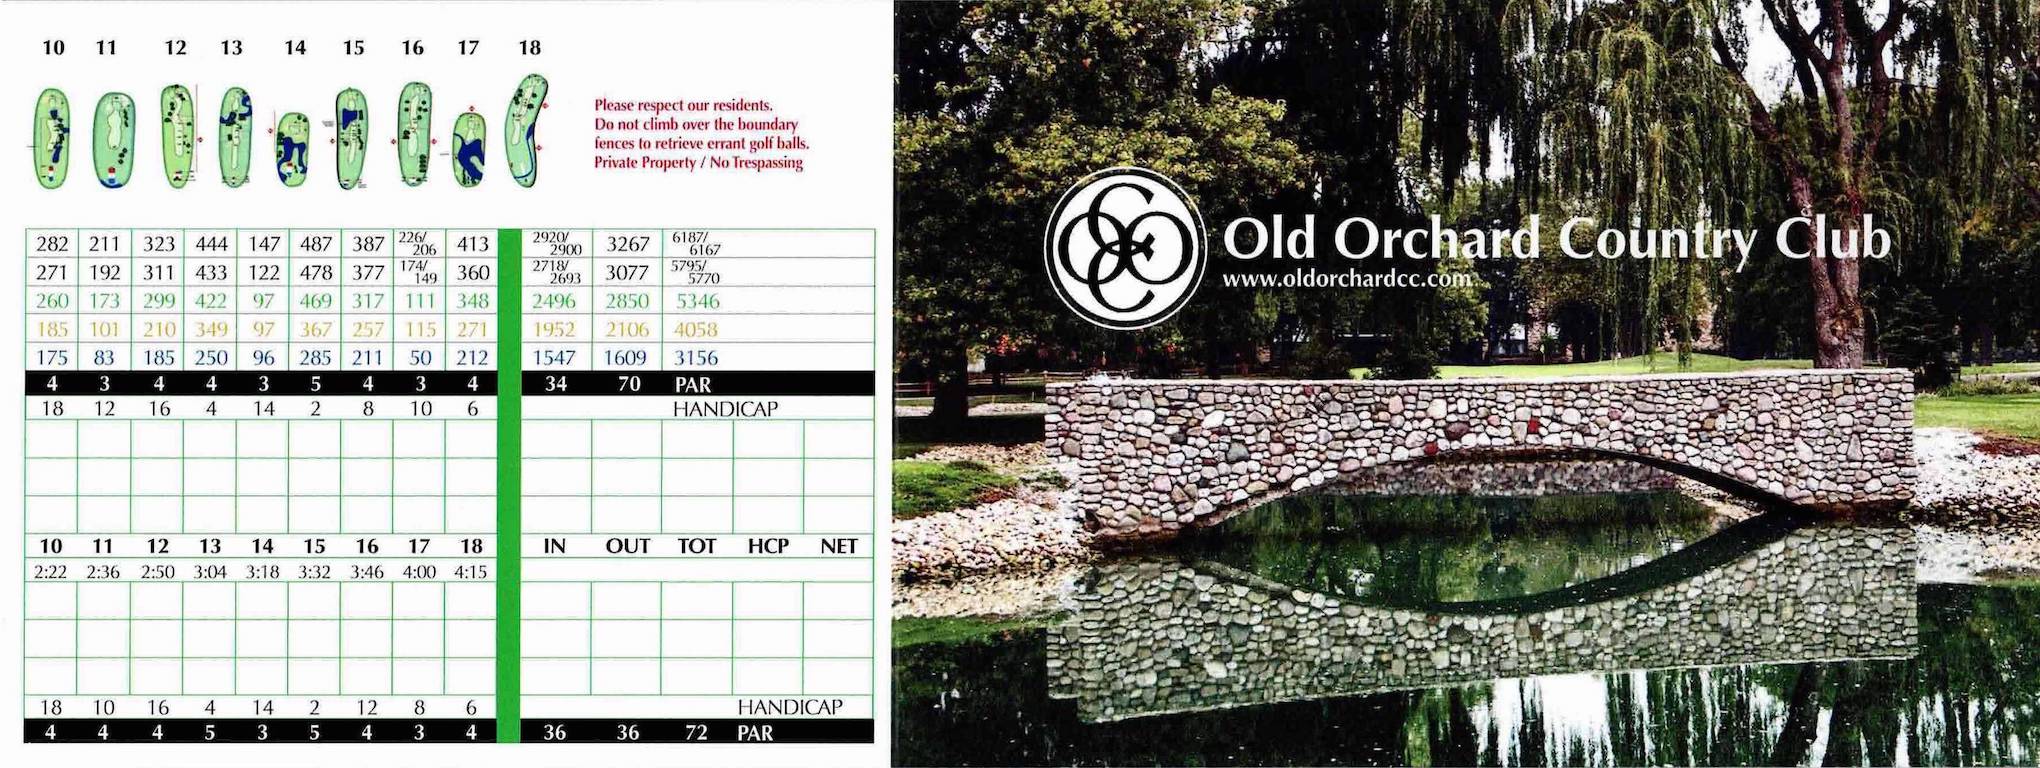 Scan of the scorecard from Old Orchard Country Club in Mt. Prospect, Illinois. 